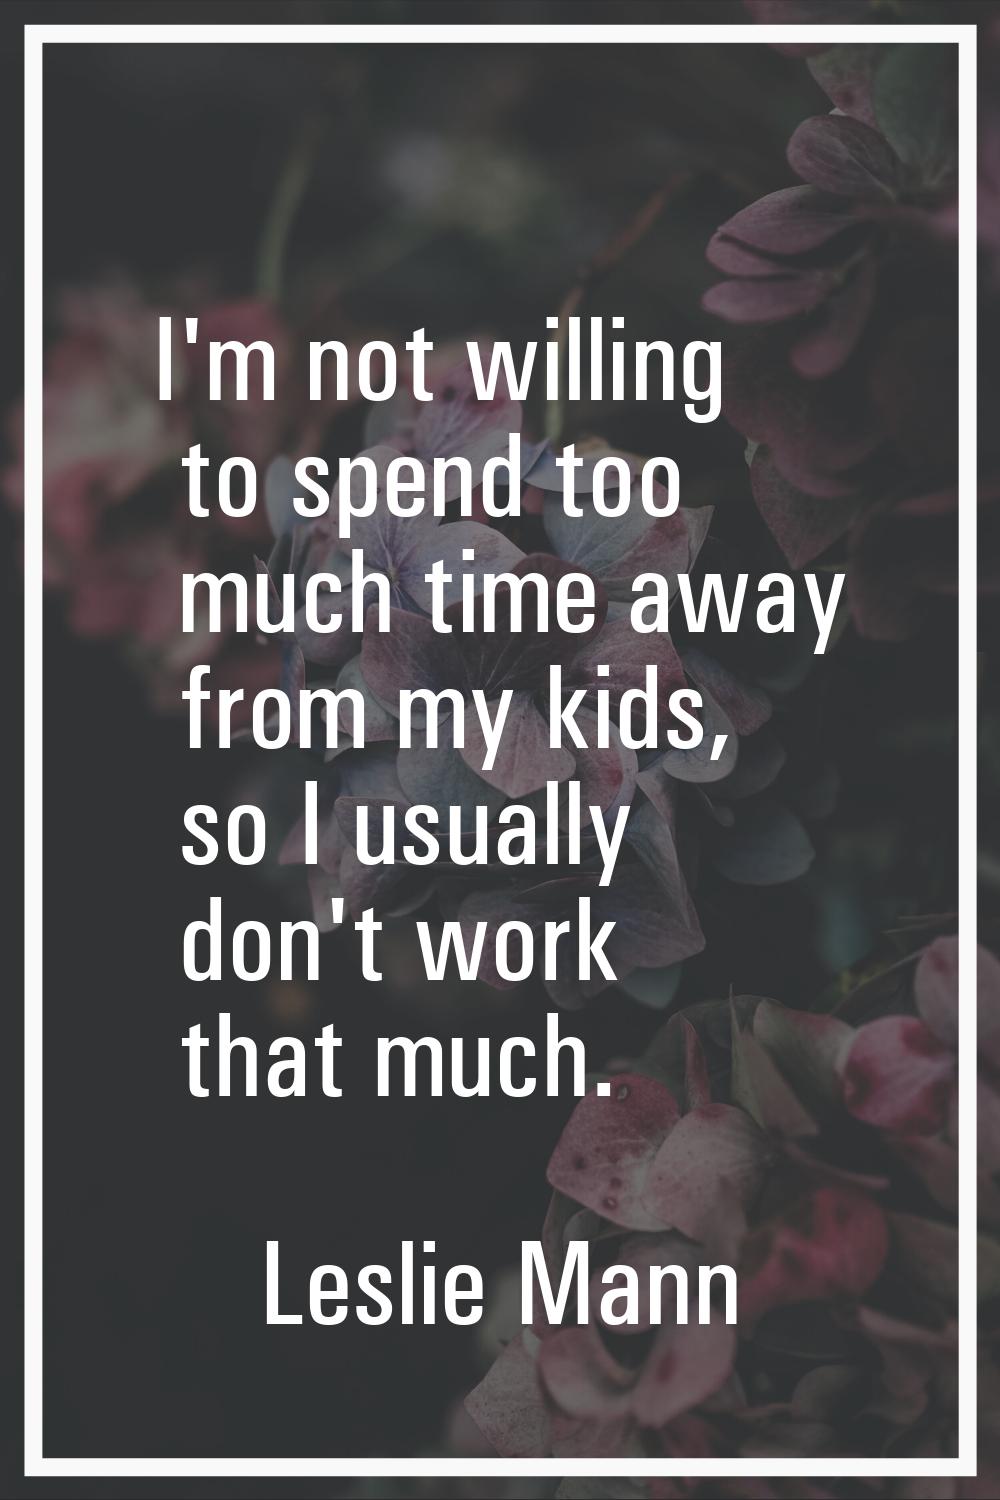 I'm not willing to spend too much time away from my kids, so I usually don't work that much.